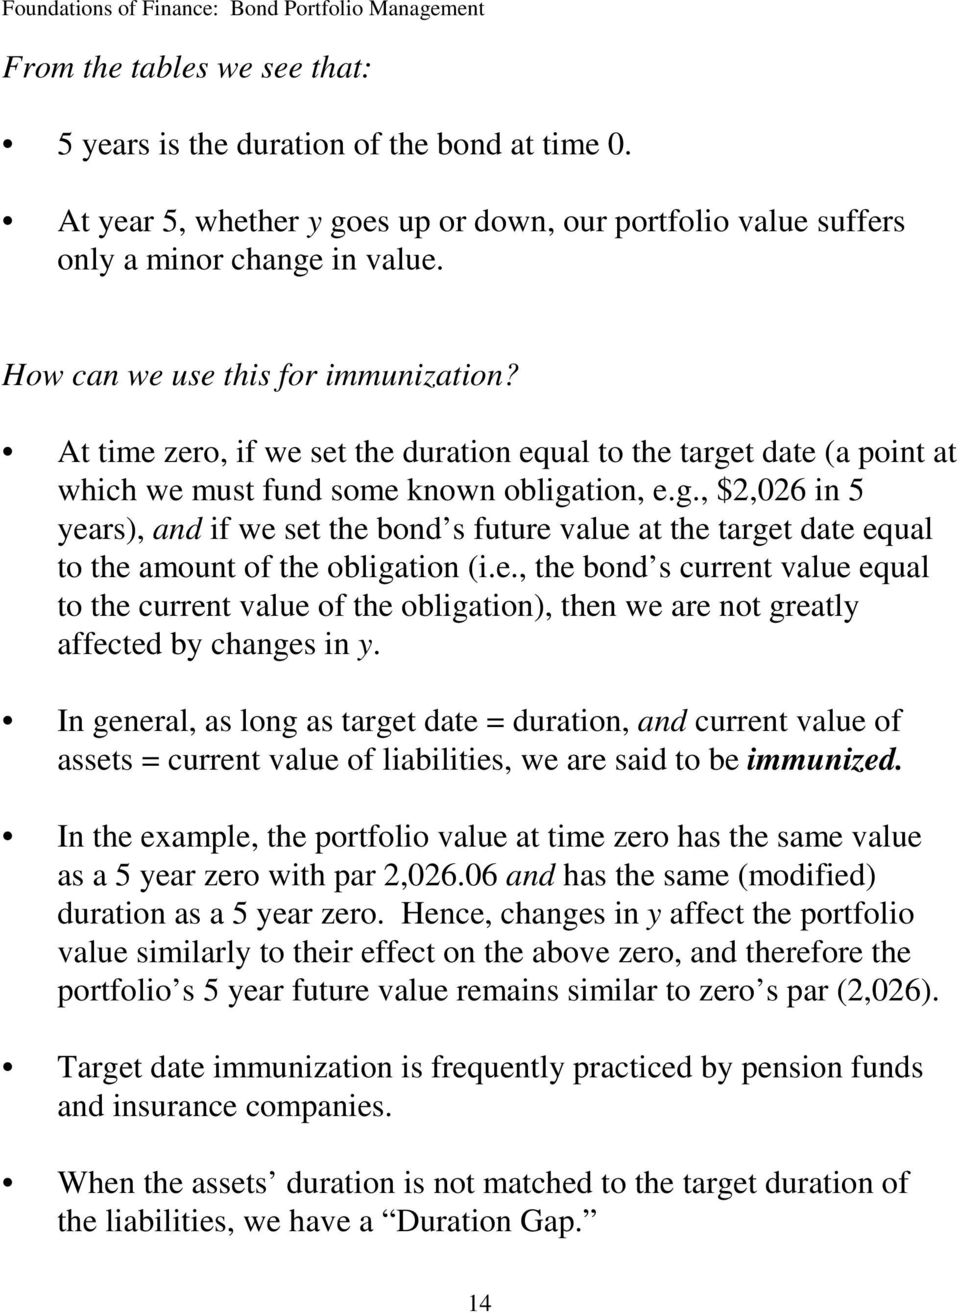 t date (a point at which we must fund some known obligation, e.g., $2,026 in 5 years), and if we set the bond s future value at the target date equal to the amount of the obligation (i.e., the bond s current value equal to the current value of the obligation), then we are not greatly affected by changes in y.